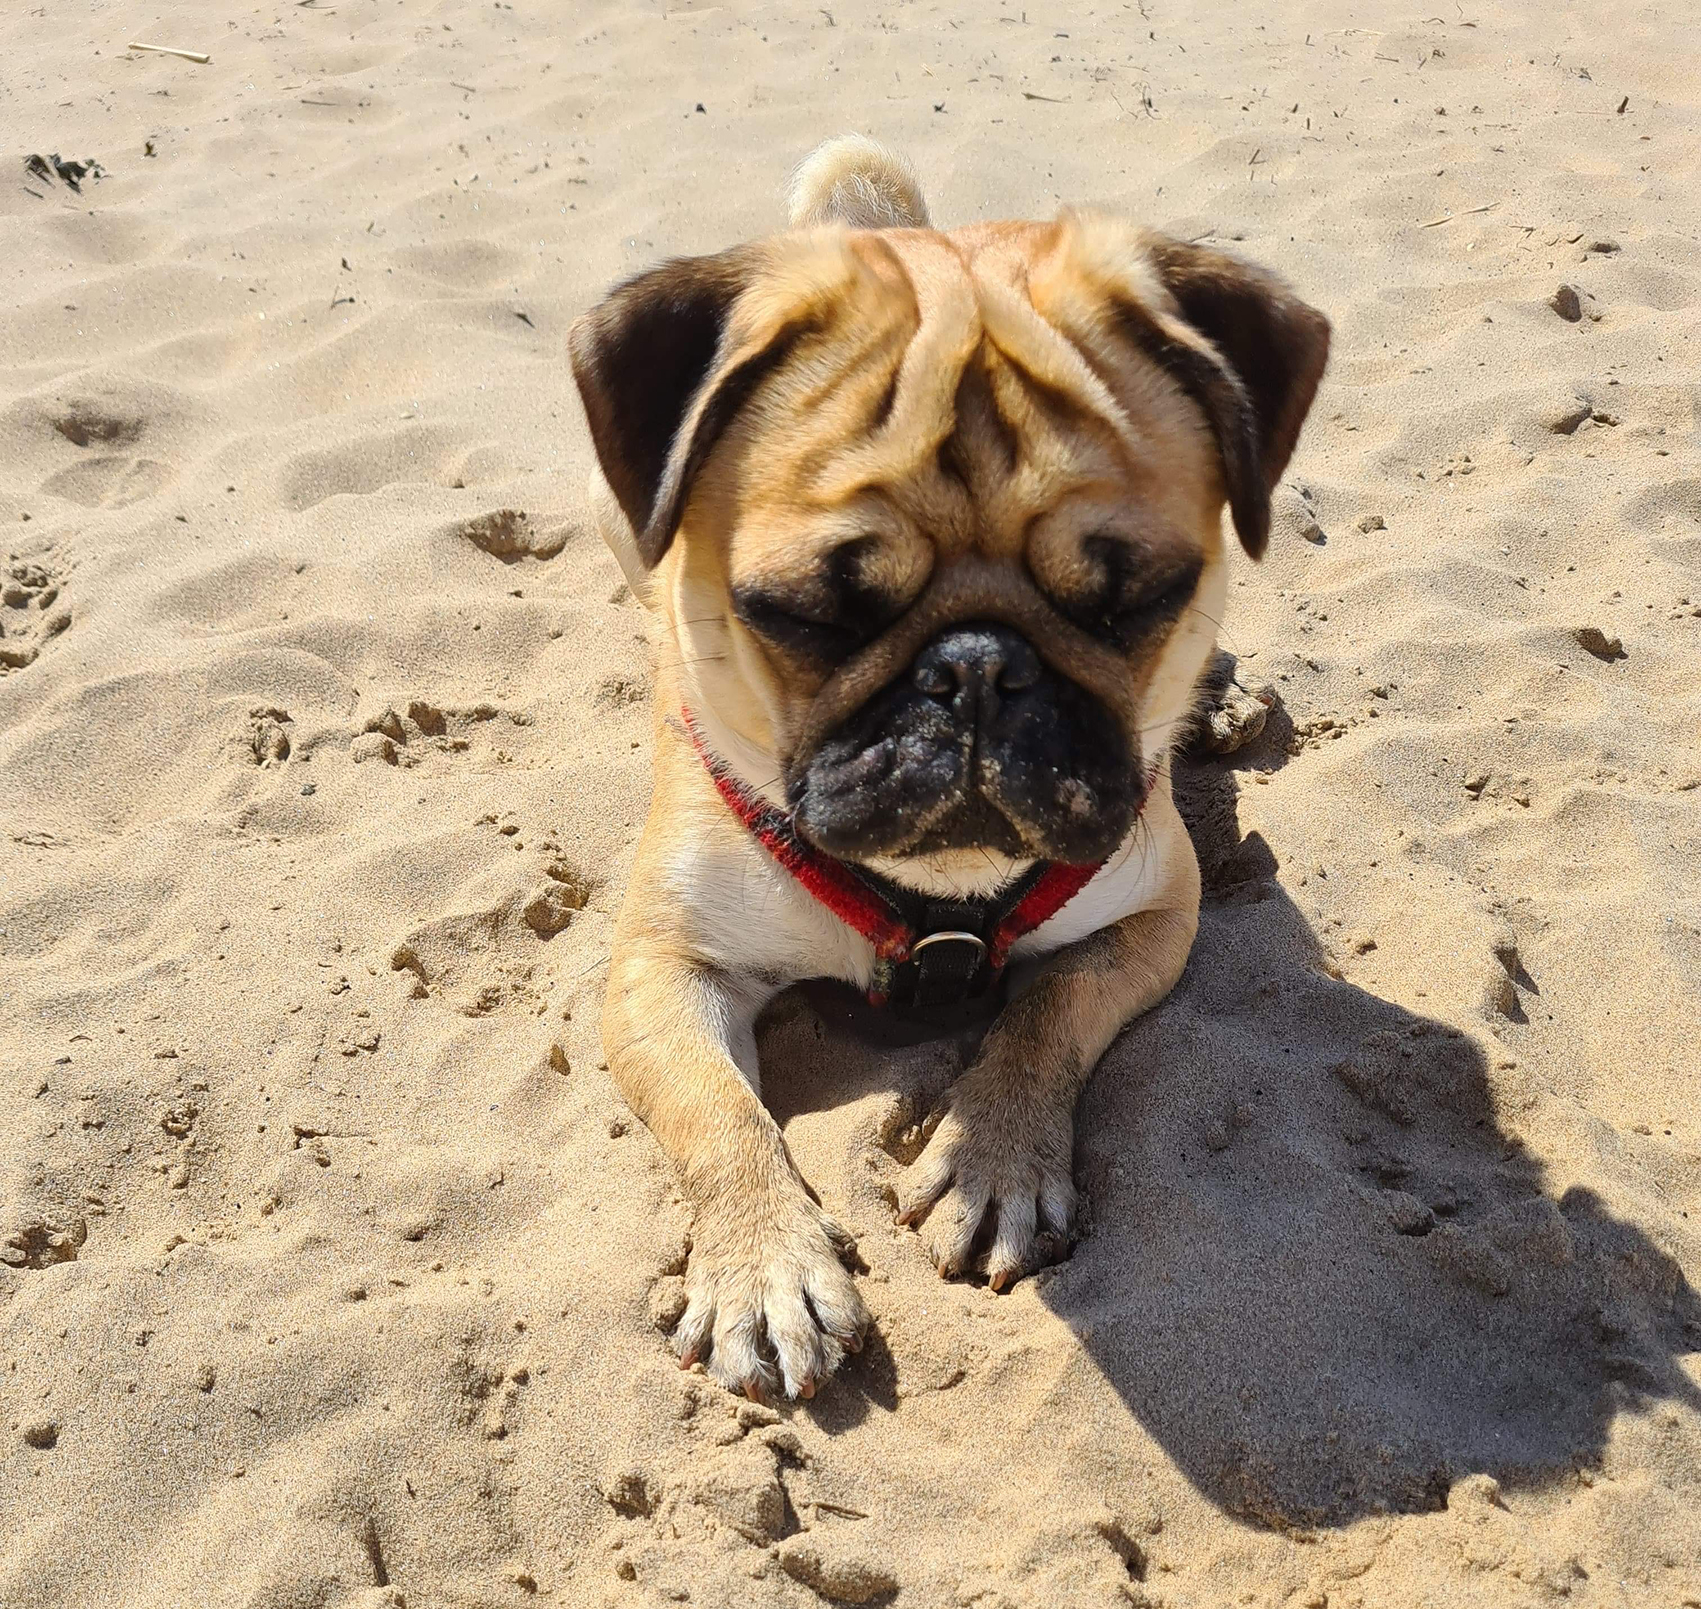 Adoption for Chuggs - image Beau on https://pugprotectiontrust.org